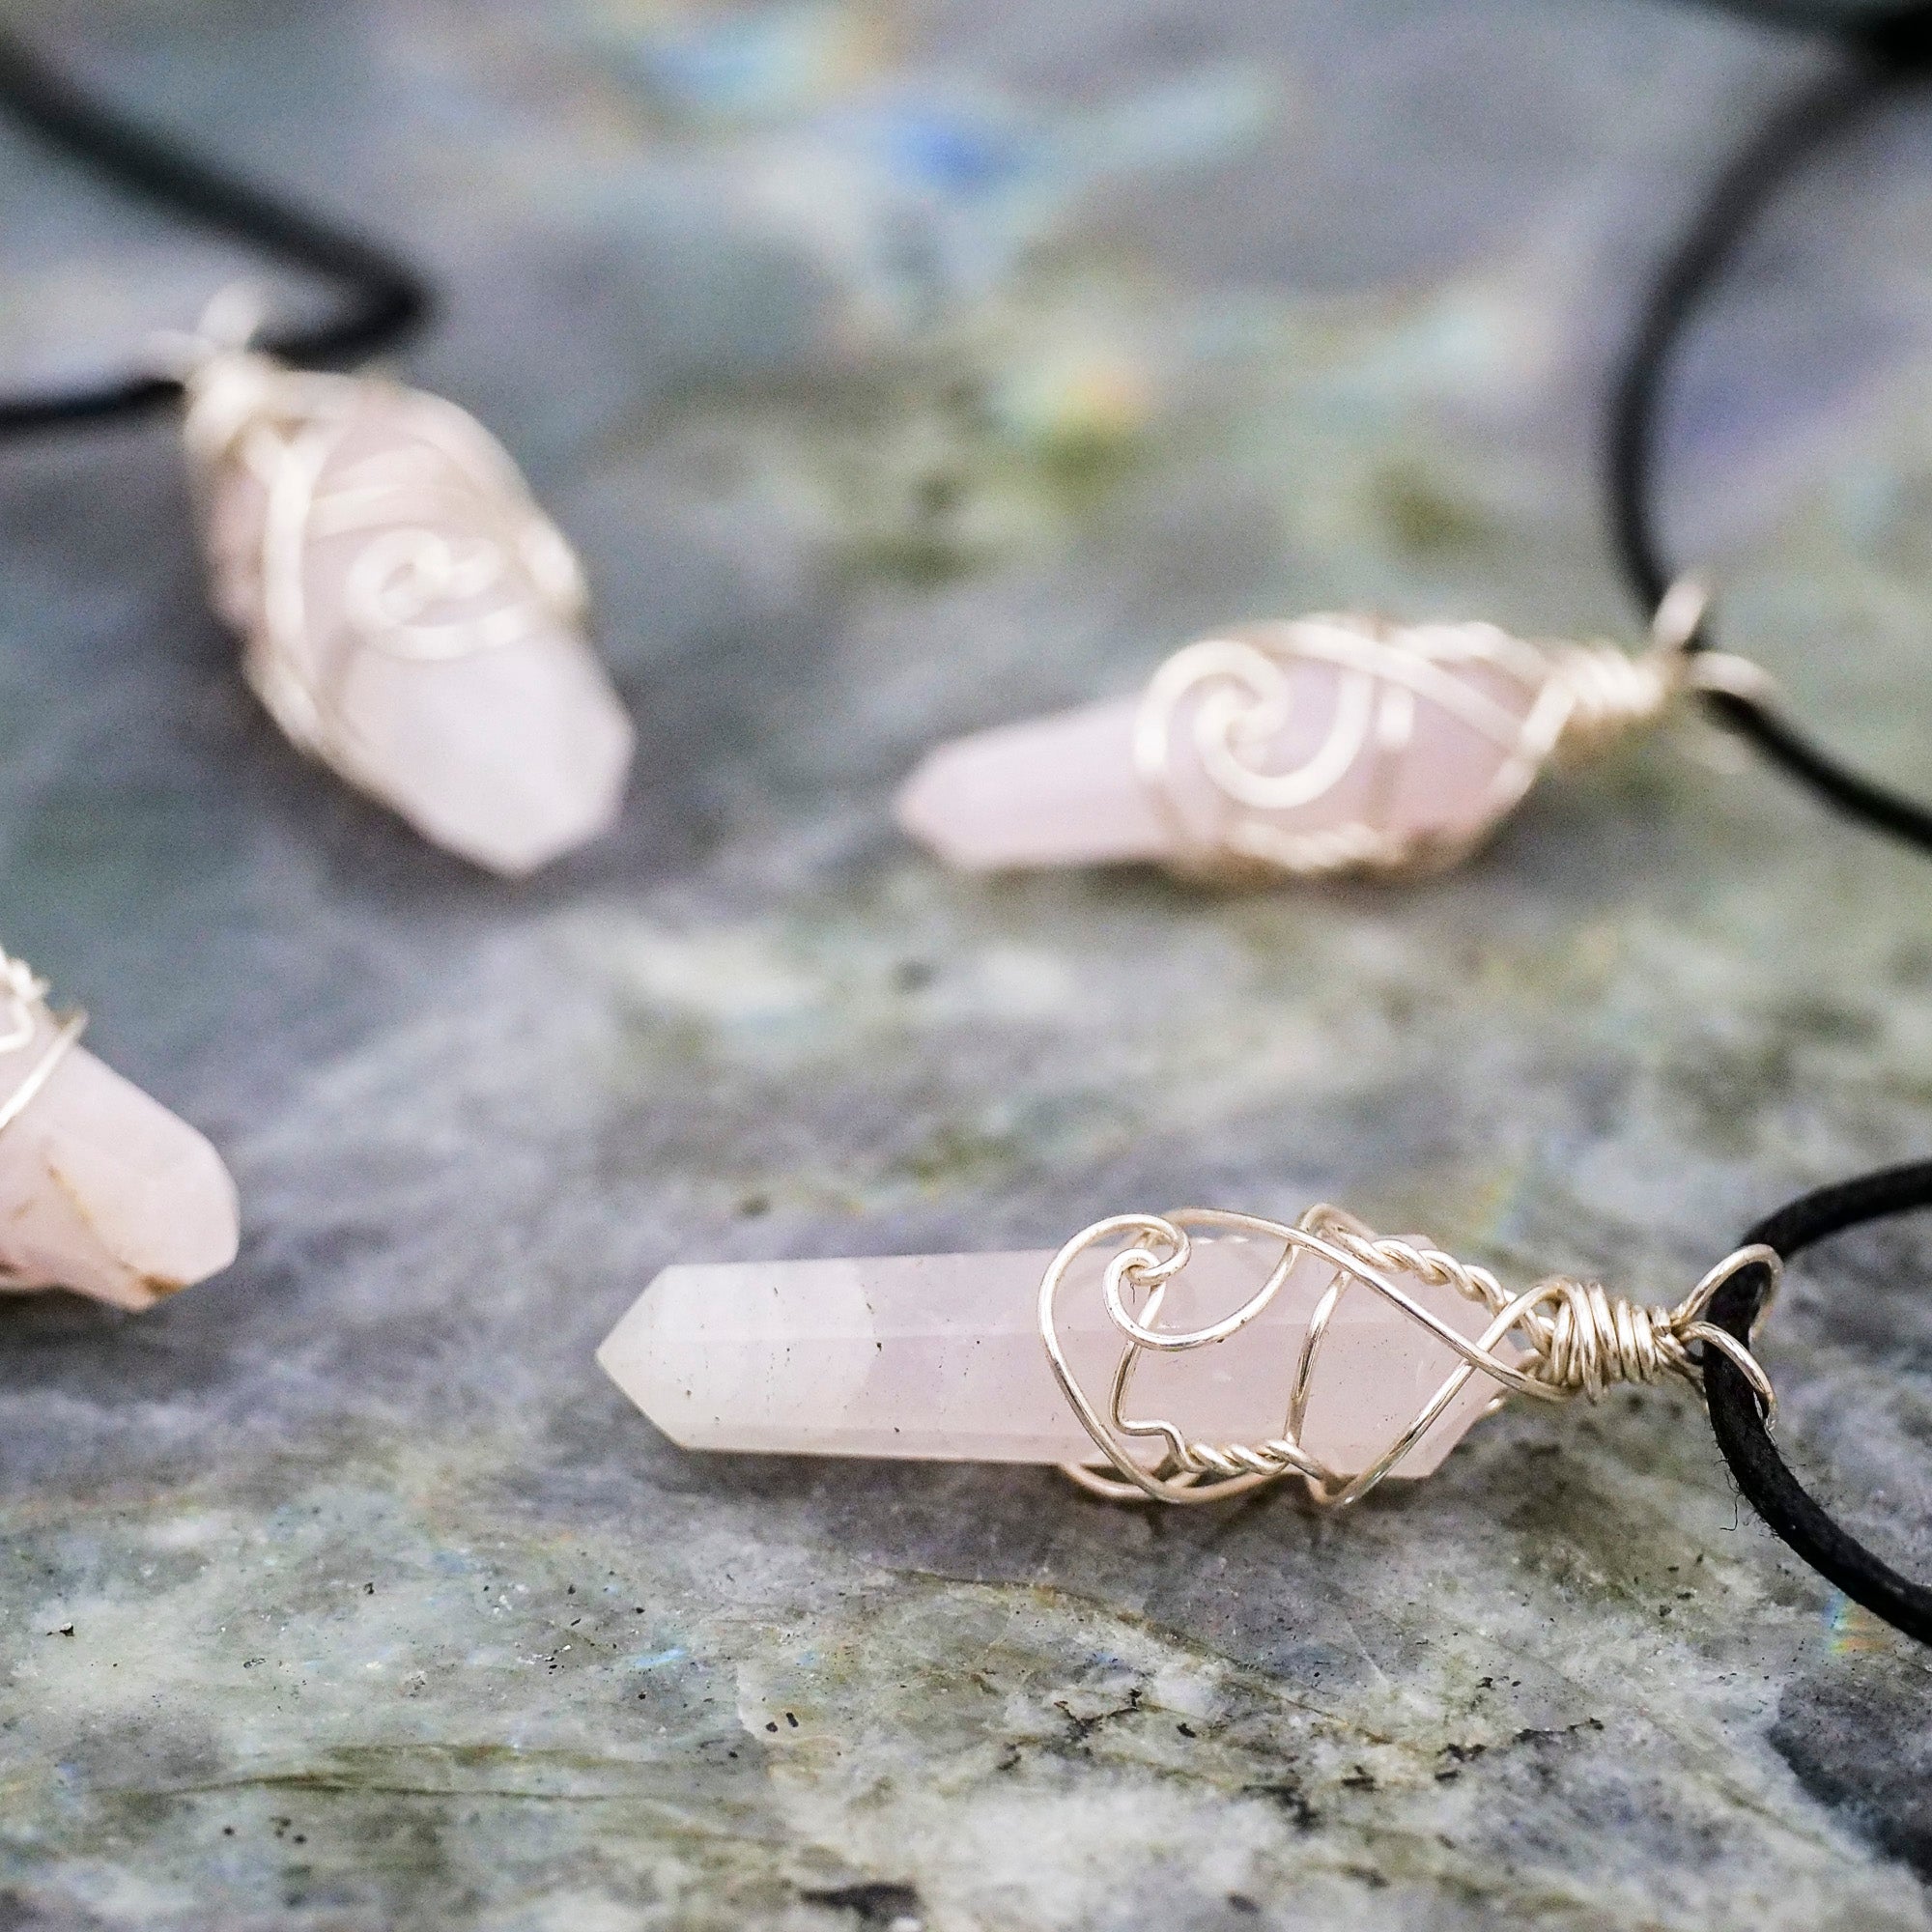 Merlin's Realm Crystal Necklaces Jewelry: Necklace Merlin's Realm Rose Quartz 